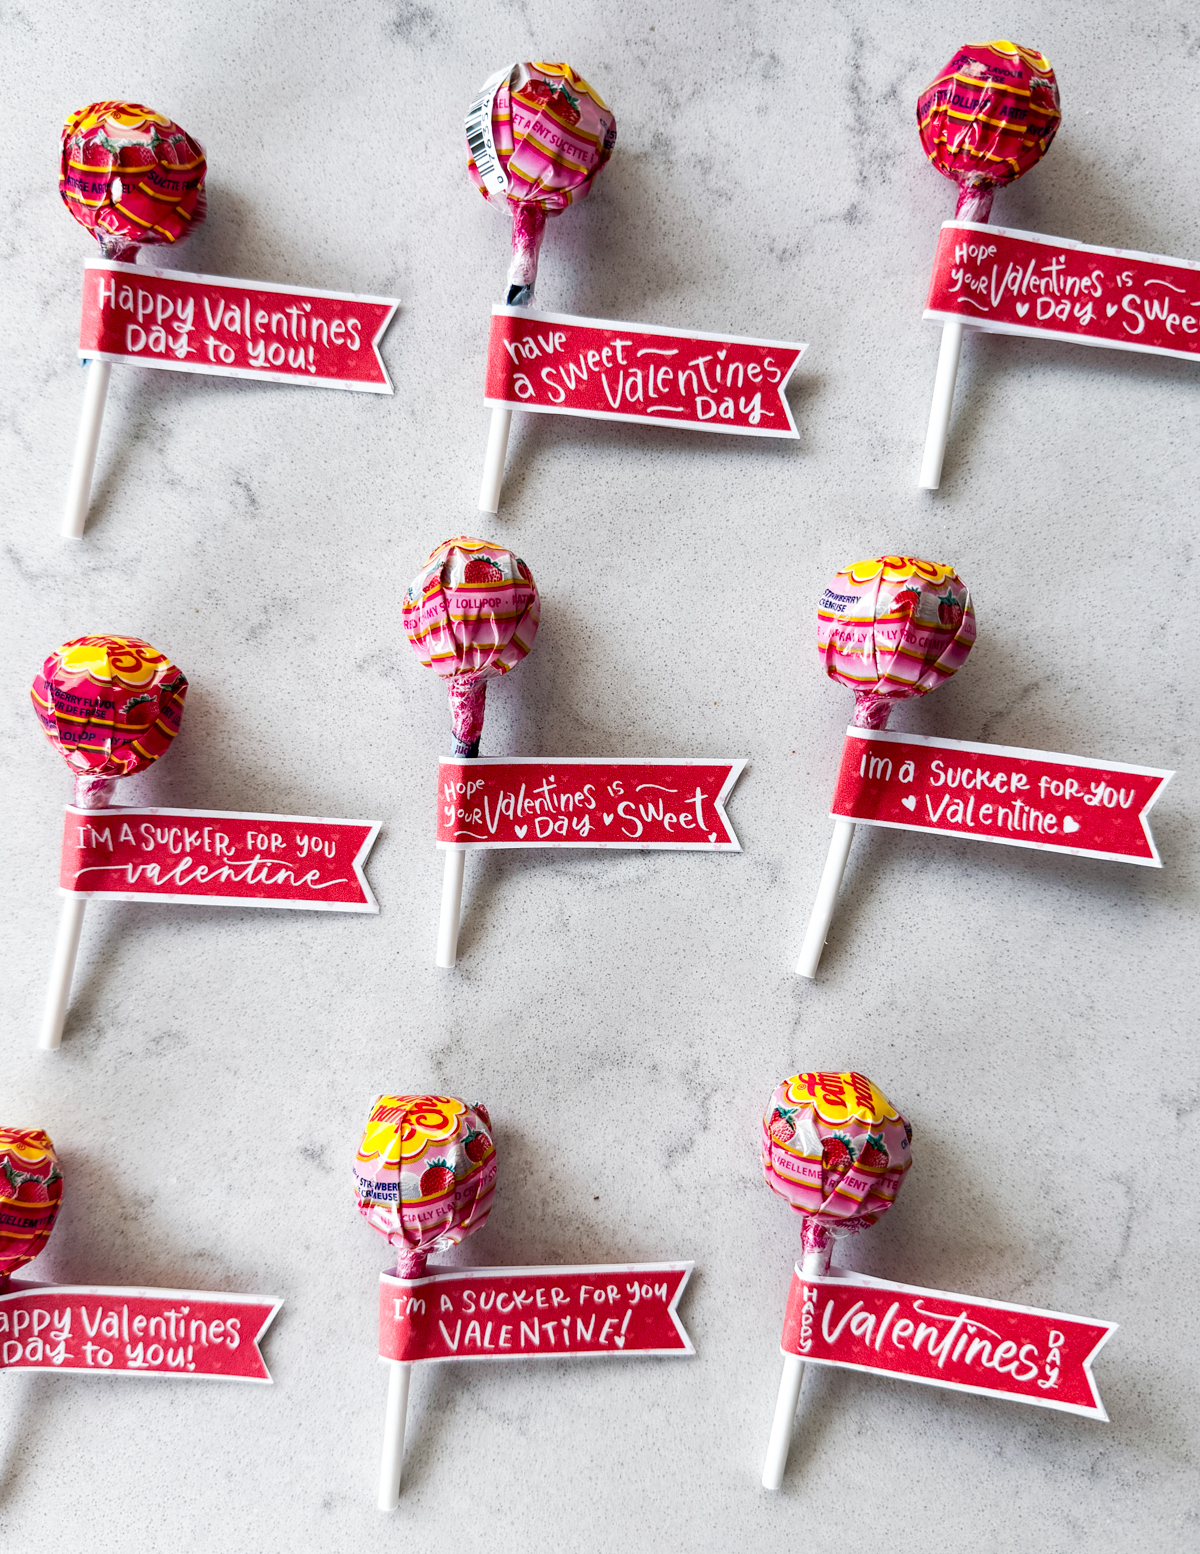 Free printable valentines tags for suckers shown on suckers, 9 in total assembled like little flags on the sucker sticks